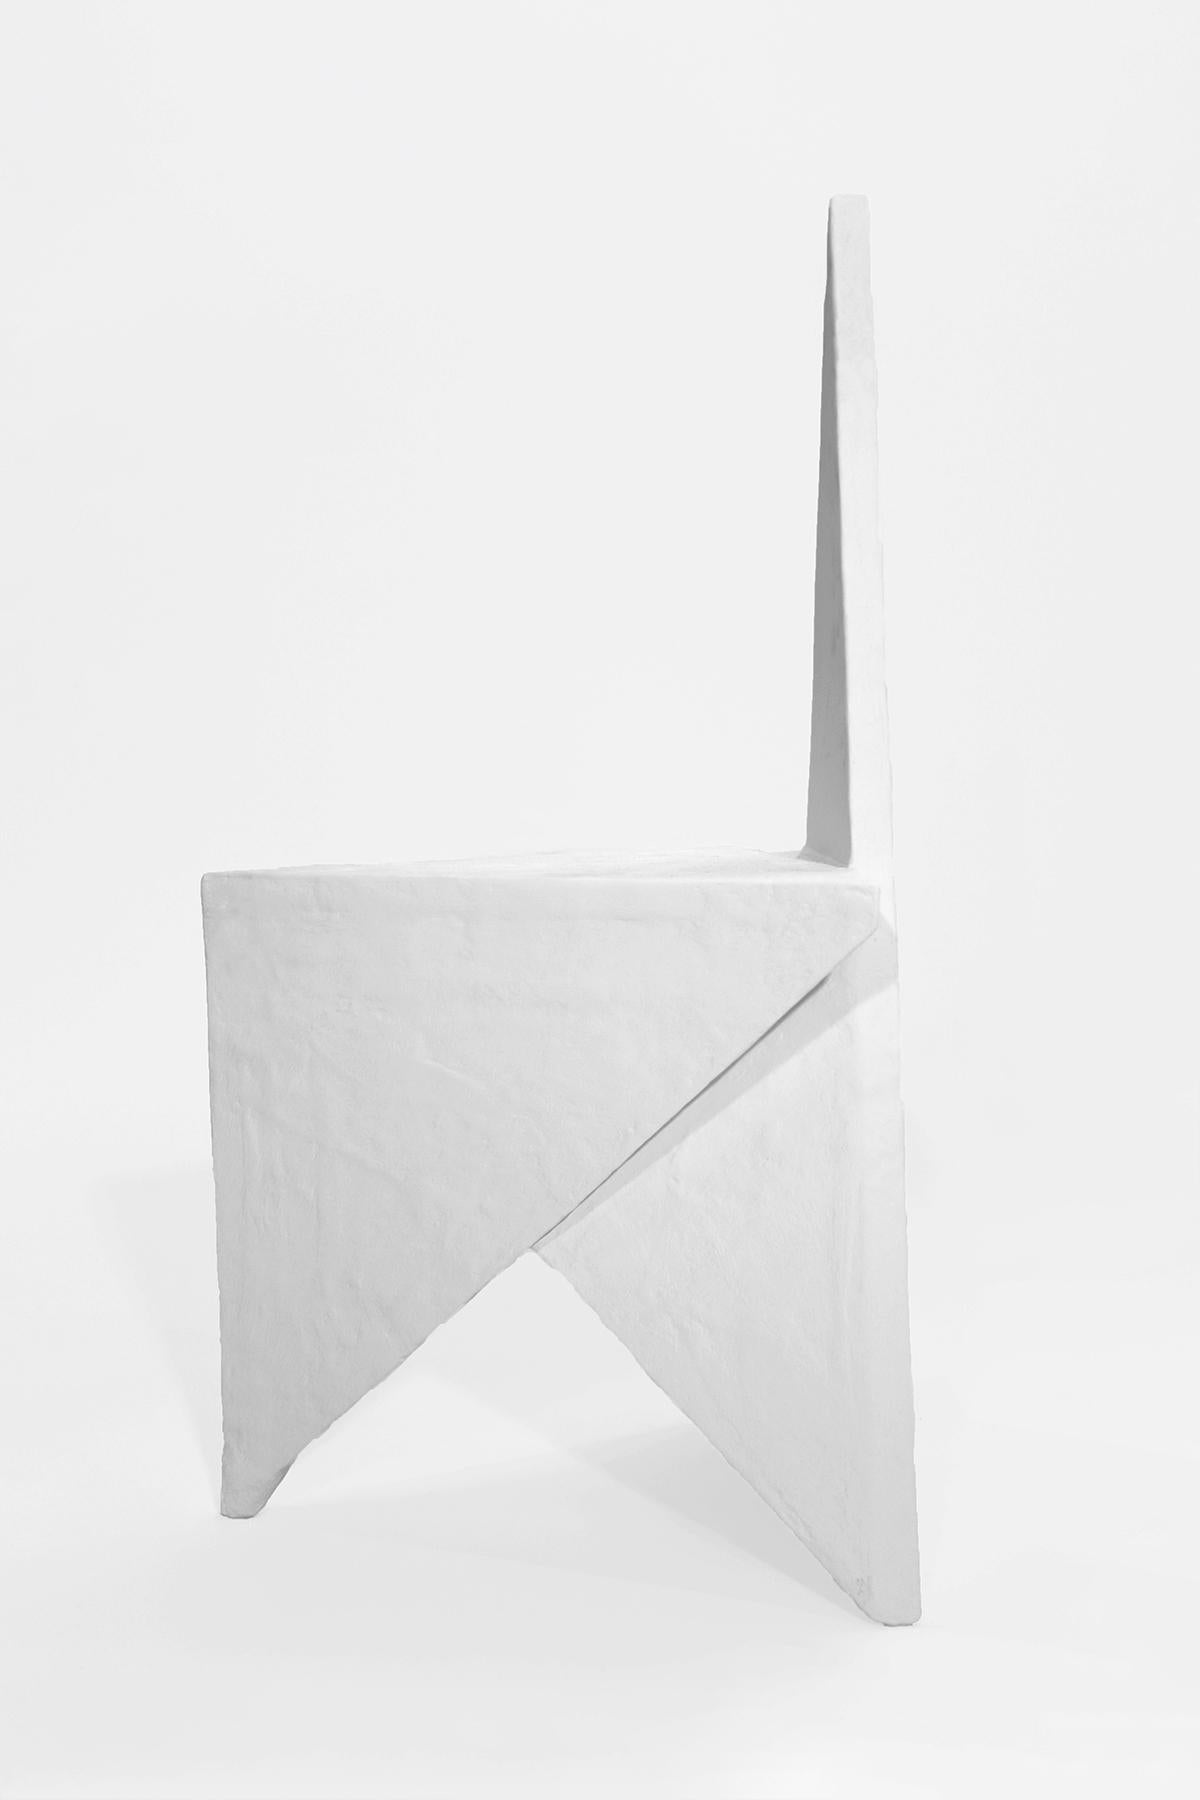 Material Lust [American, b. 1981, 1986]
Special Edition vanishing twin chair, 2018
Shown in white plaster.
Measures: 36” H x 17” W x 18” D.
One of a kind.
Each piece is meticulously handmade by Material Lust in their Soho studio.
Commission lead